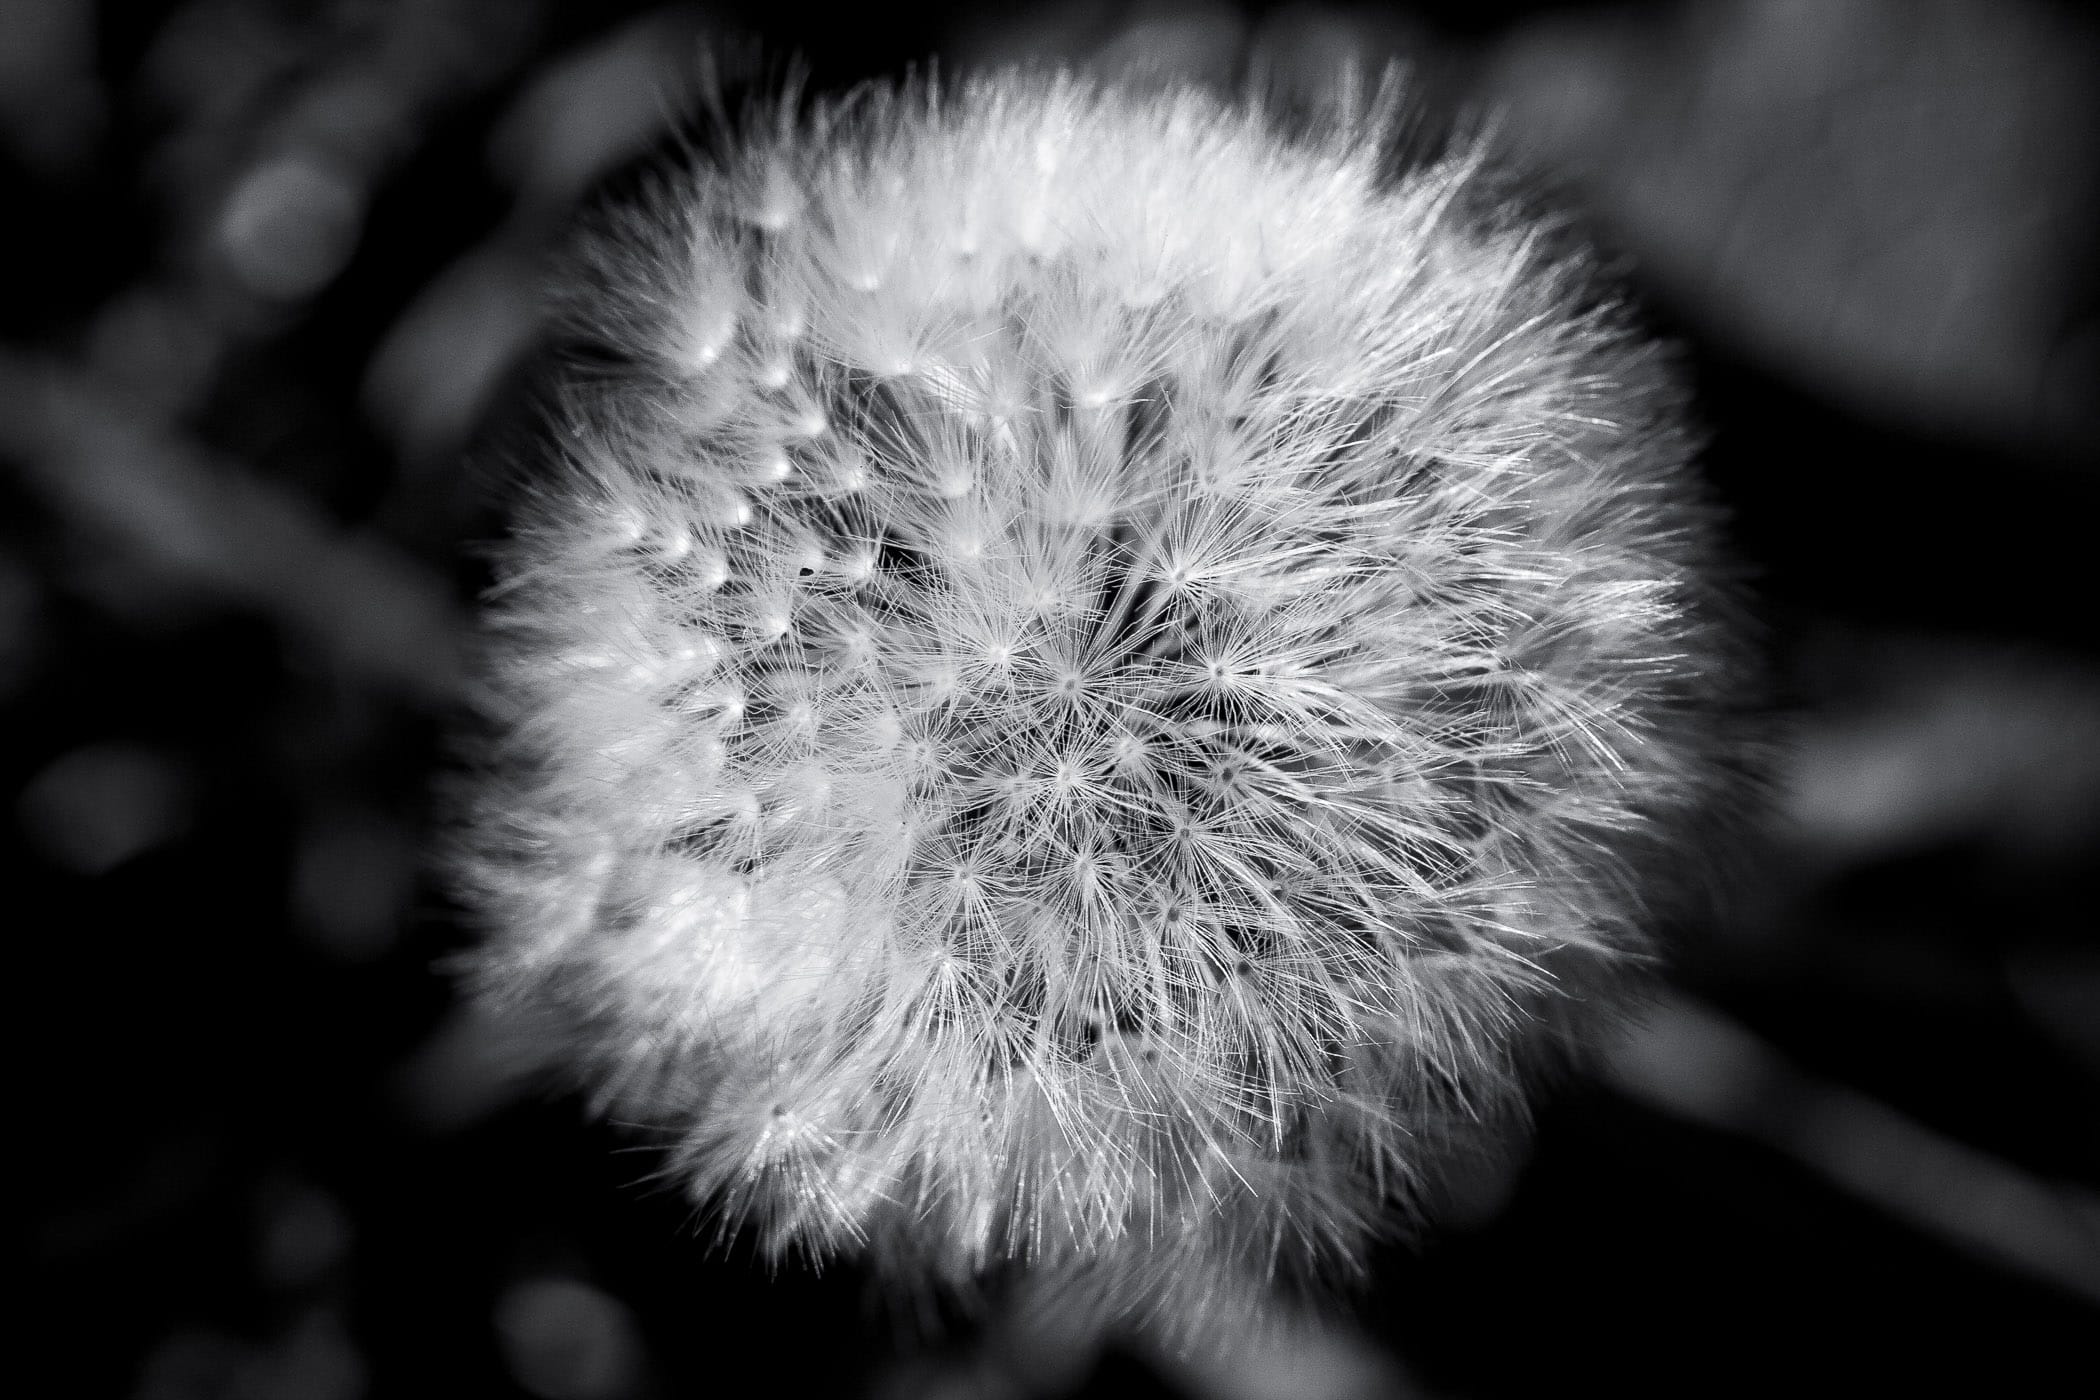 A seed sphere from a dandelion.